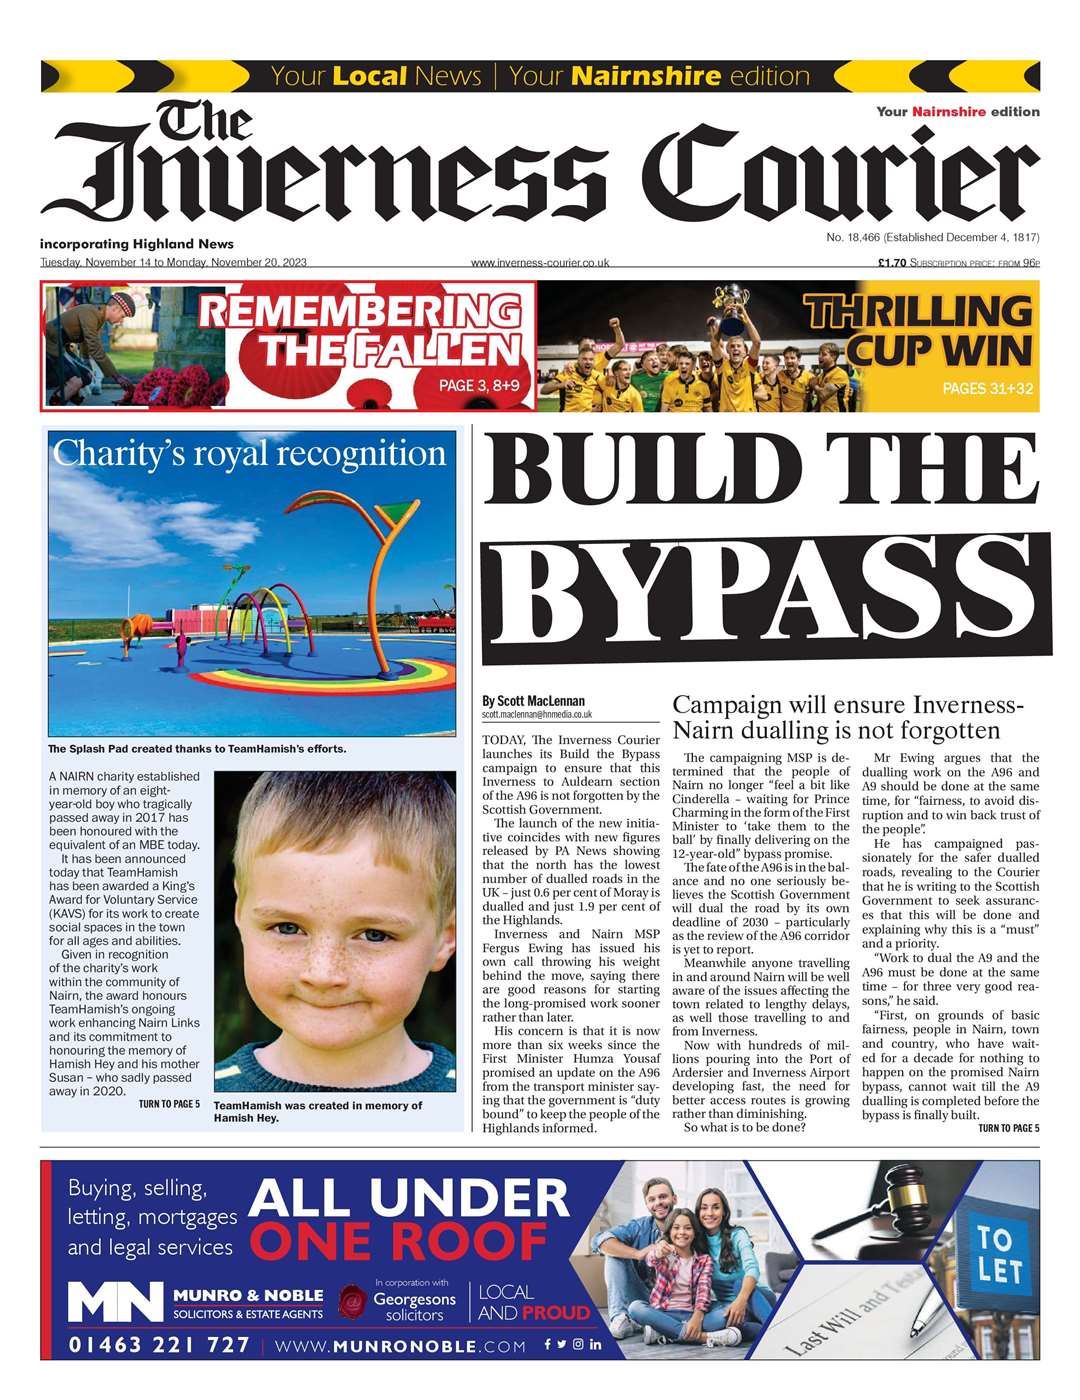 The Inverness Courier (Nairnshire edition), November 14, front page.